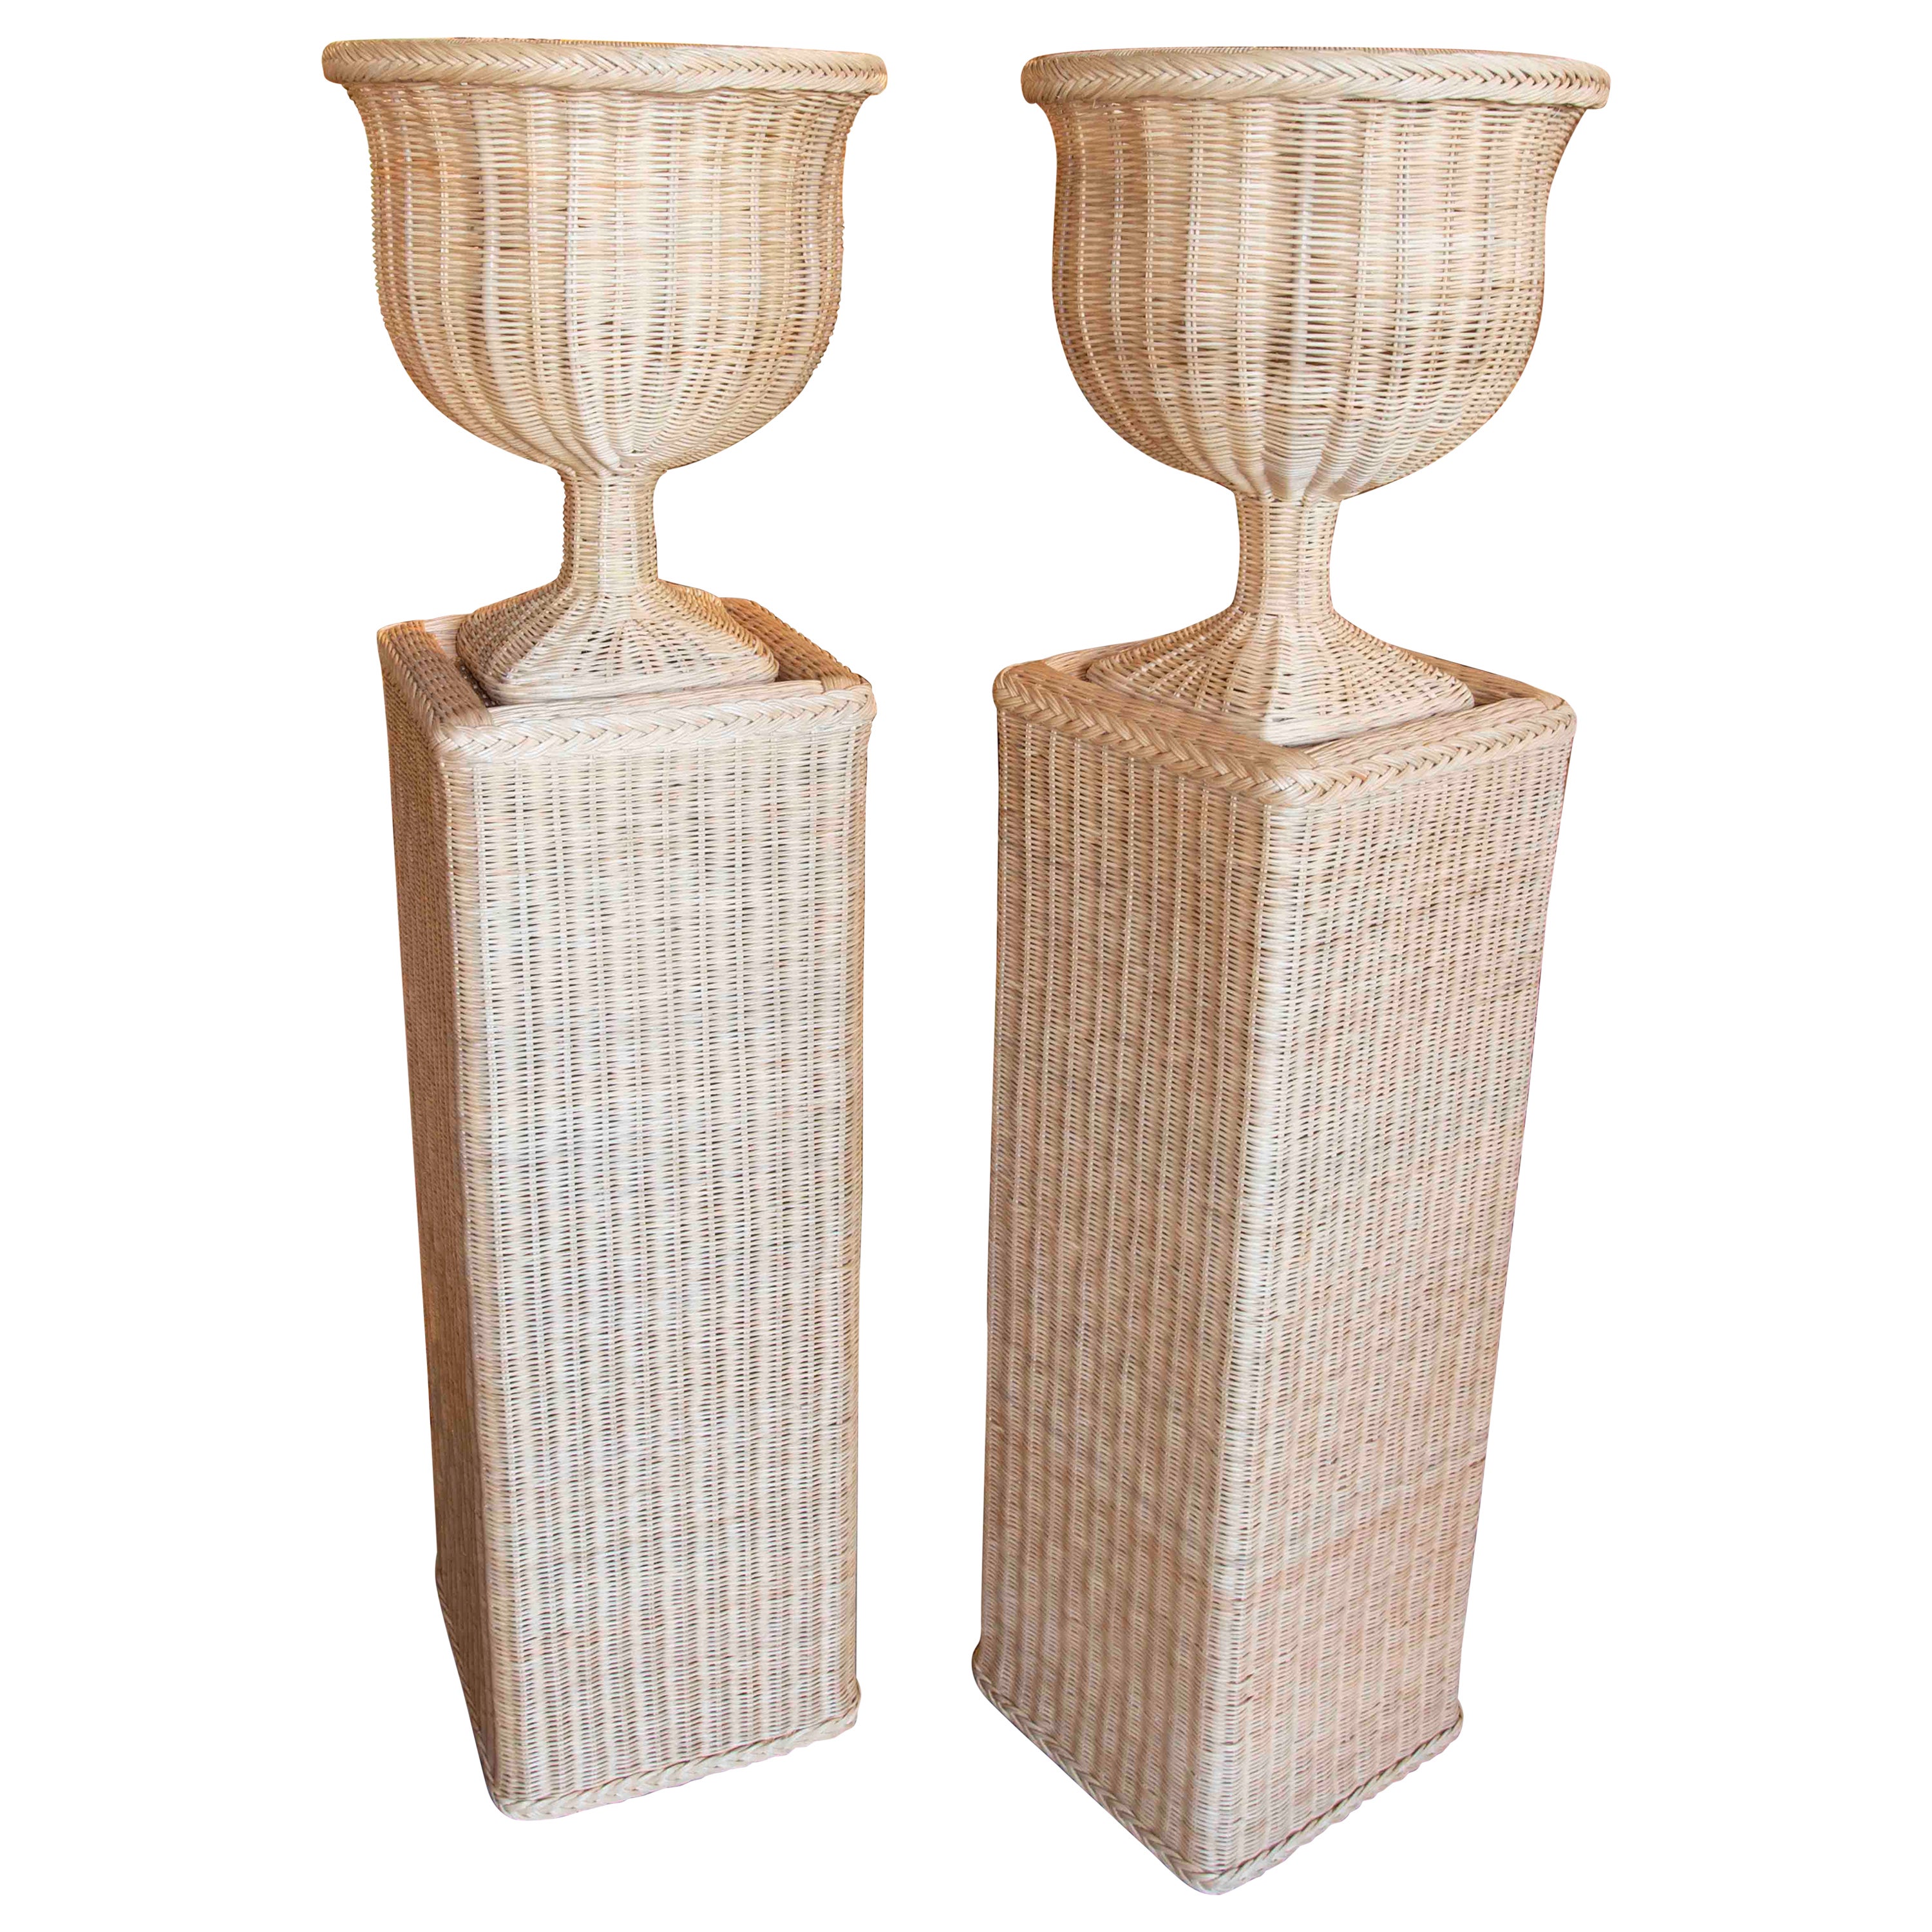 Pair of Handmade Wicker Urns with Rectangular Bases and Iron Structure